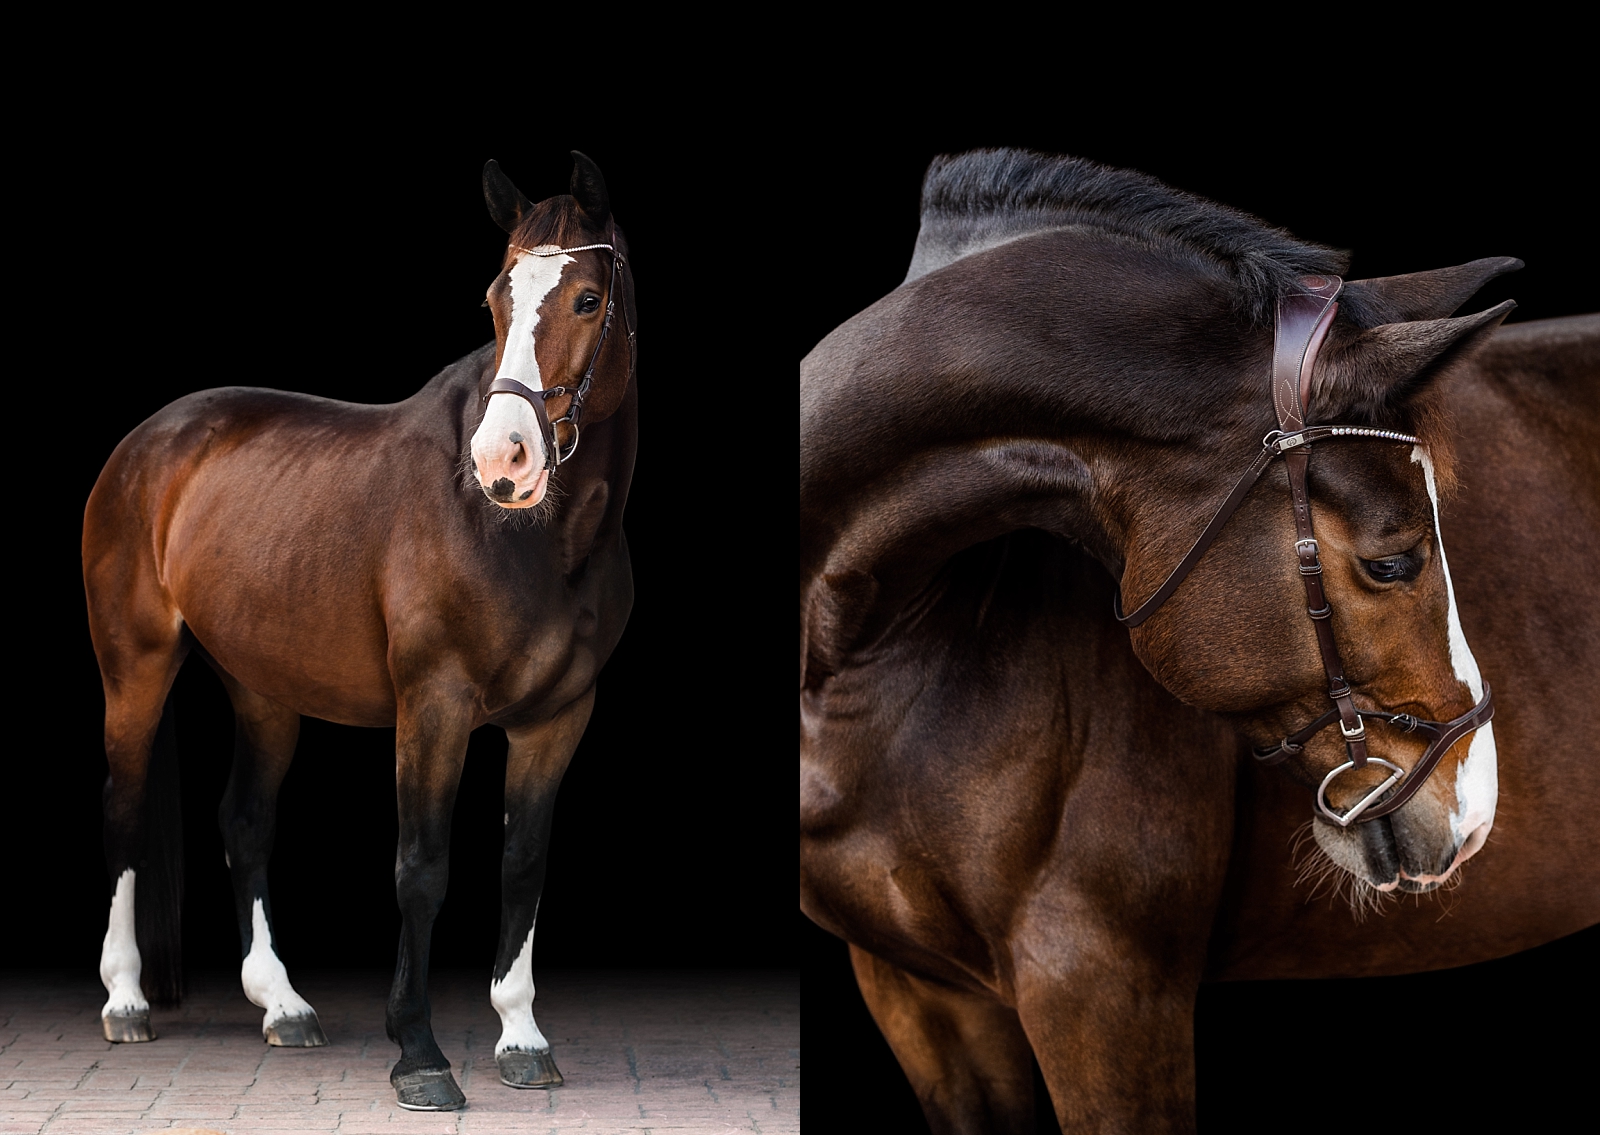 Warmblood jumper mare photographed on black background by professional horse photographer near Tallahassee FL.